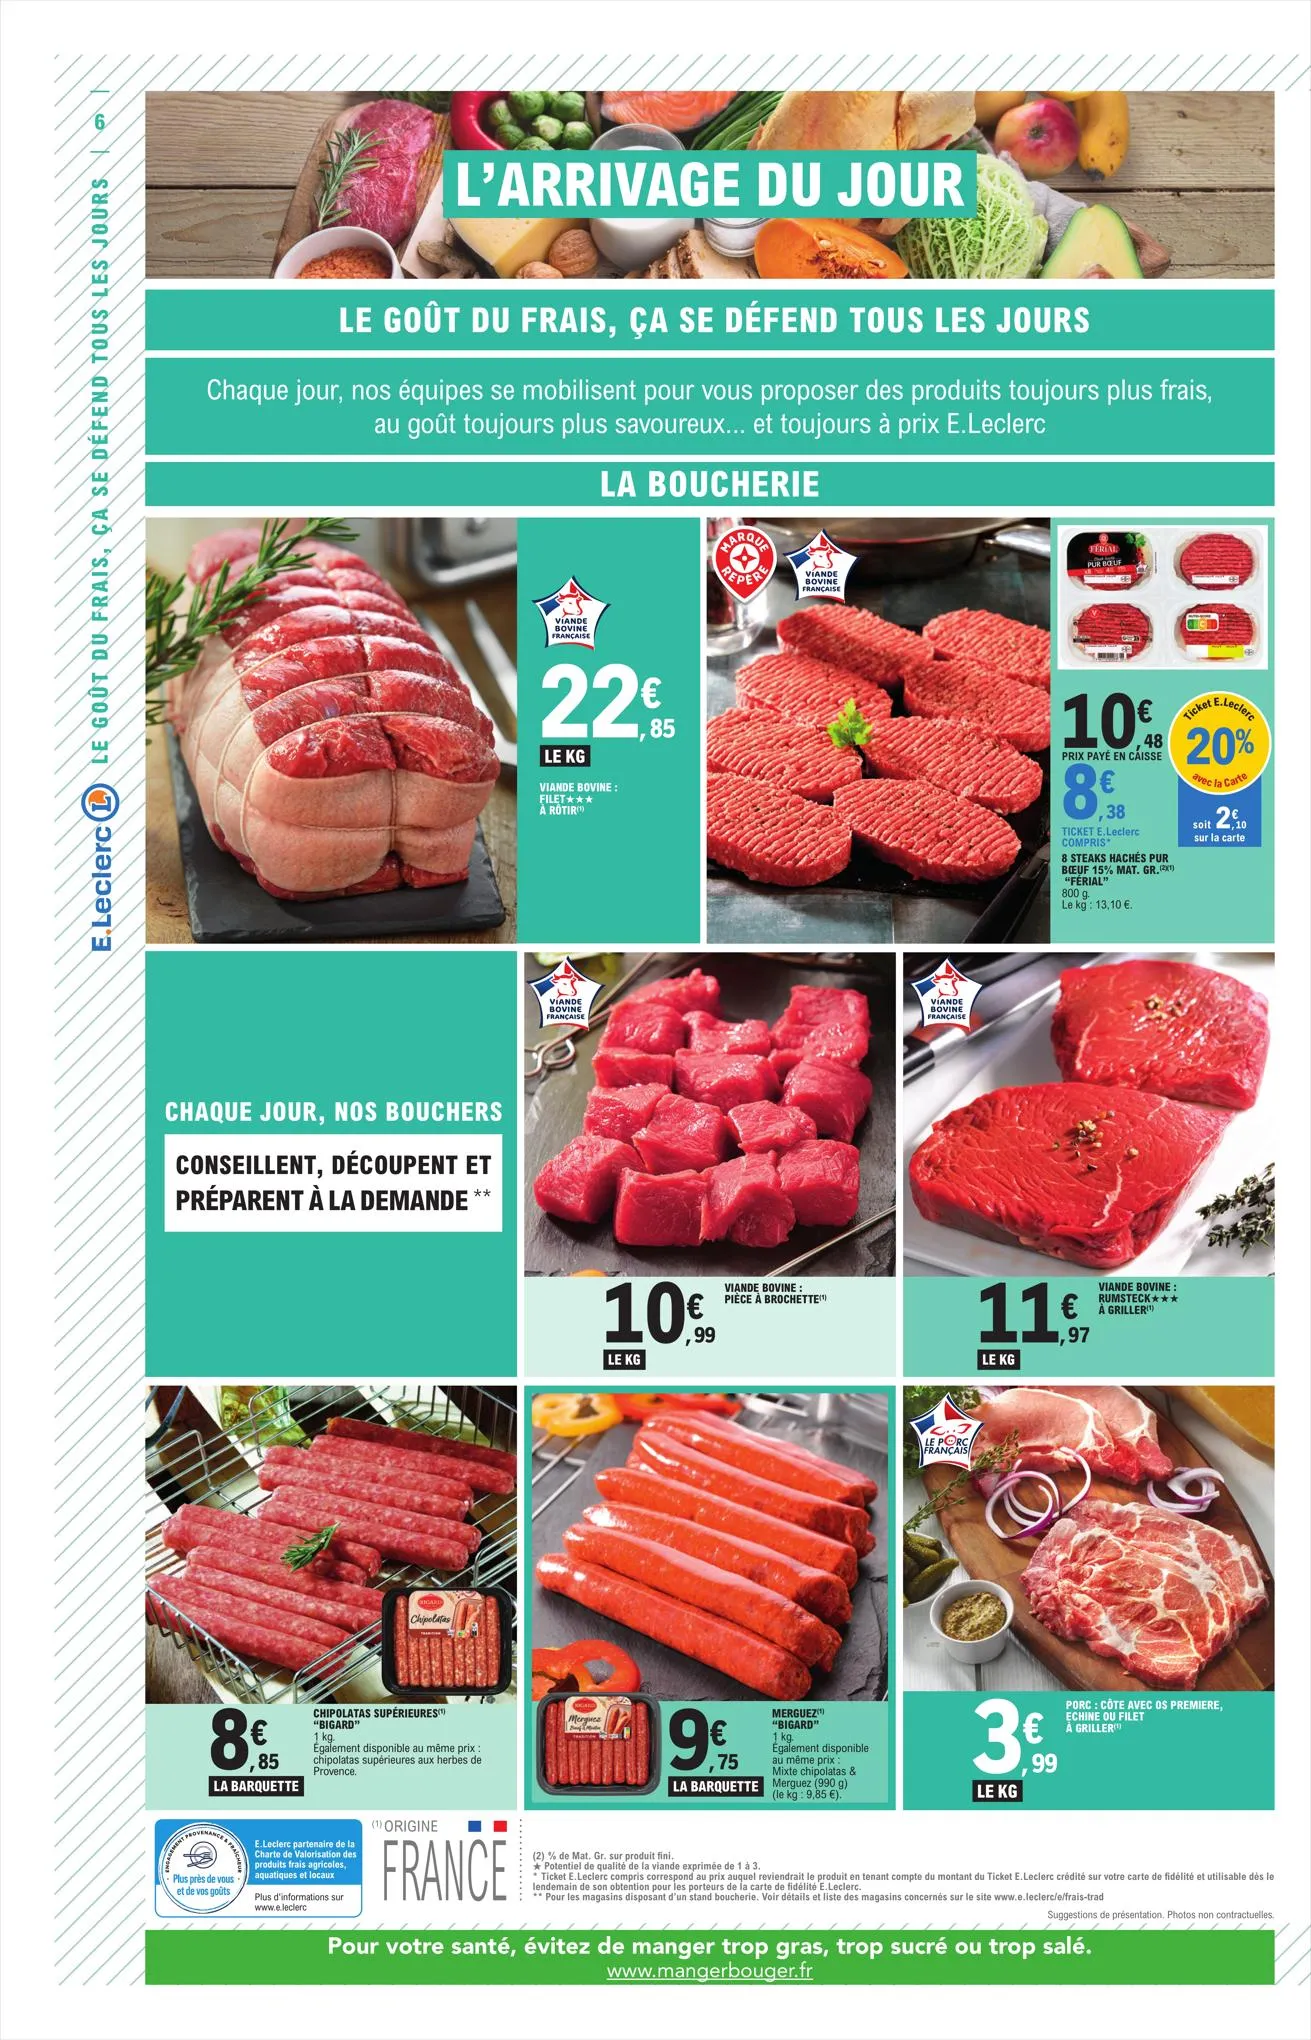 Catalogue Relance Alimentaire 10 - Mixte, page 00006